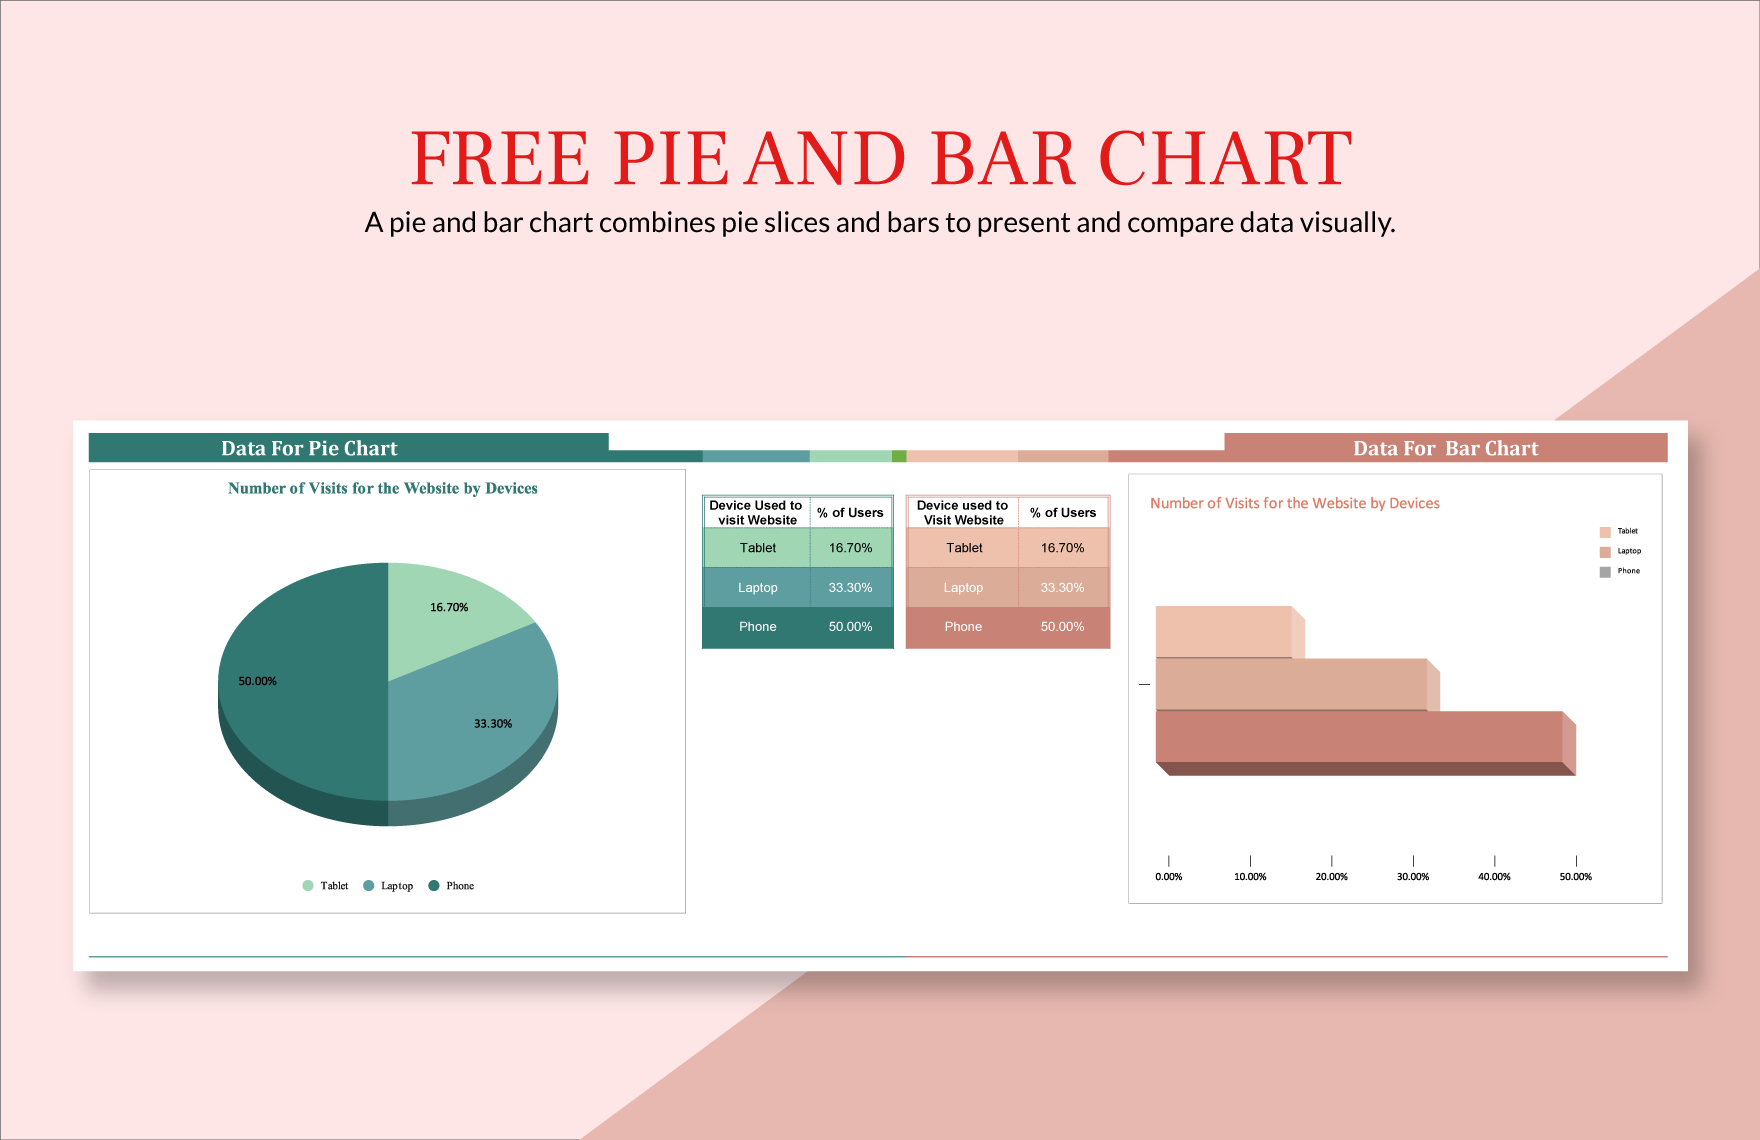 Pie And Bar Chart